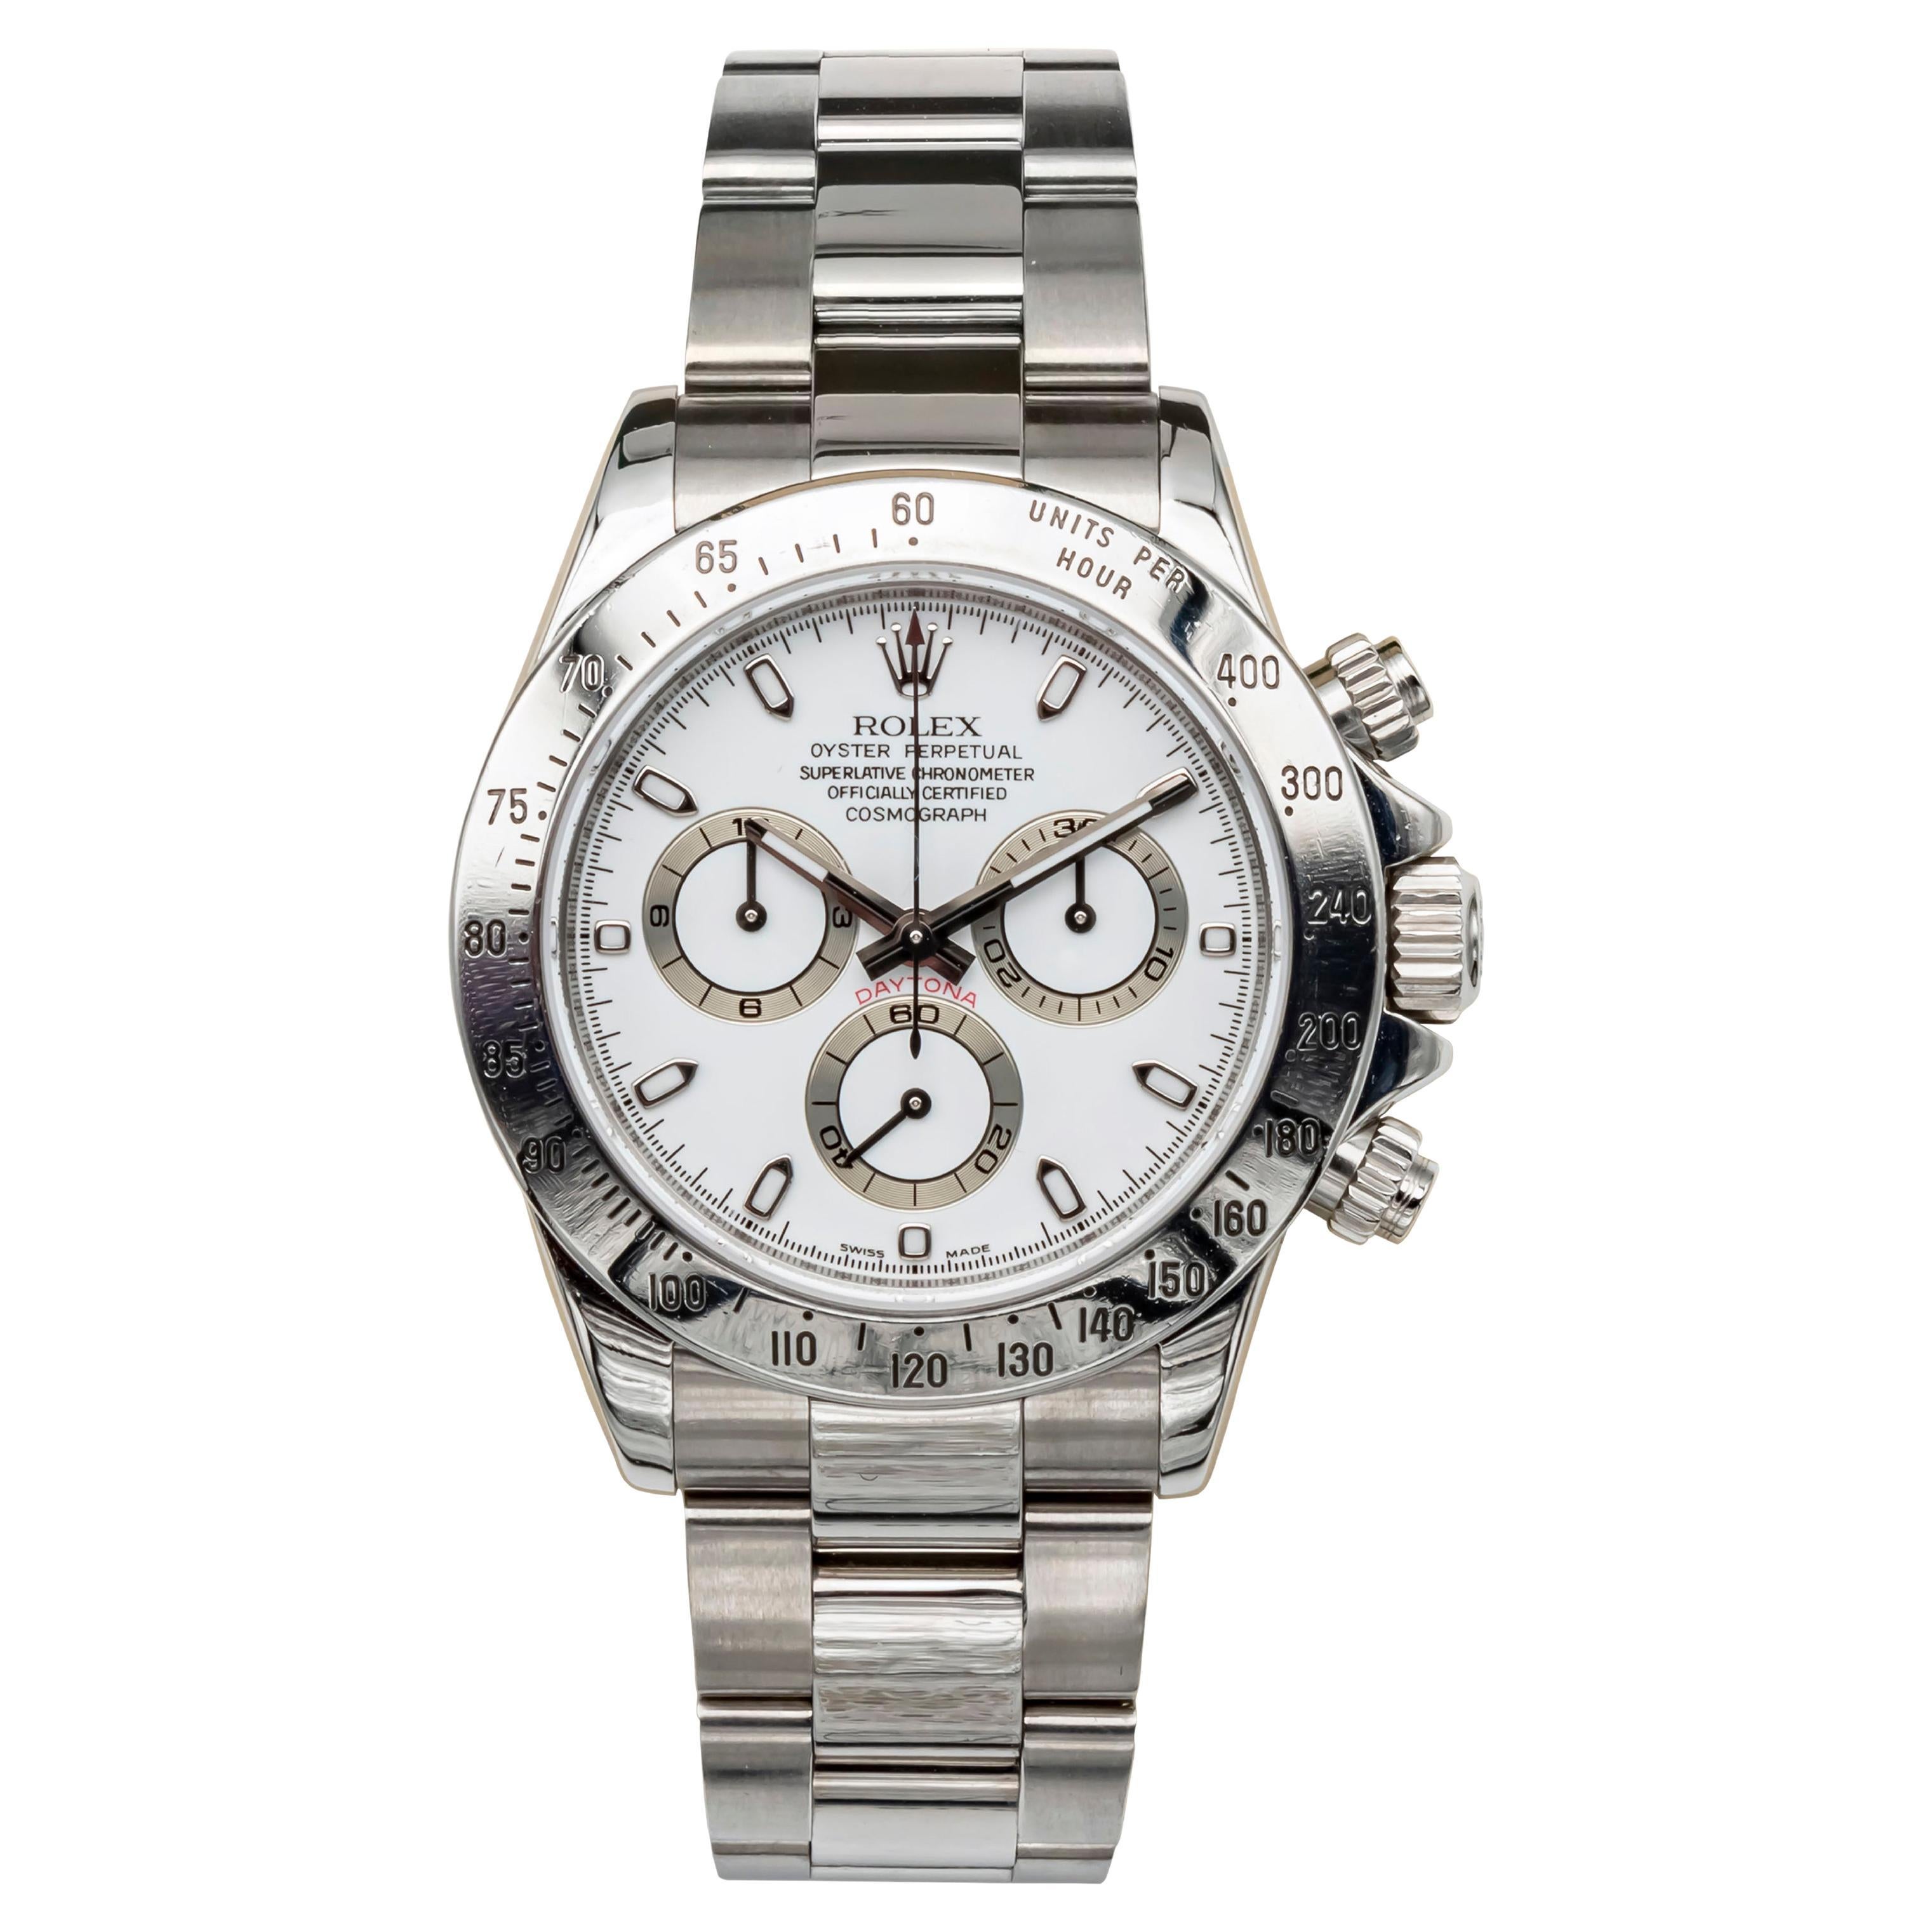 Rolex Daytona Ref-116520 Iconic White Dial Stainless Steel Cosmograph Wristwatch